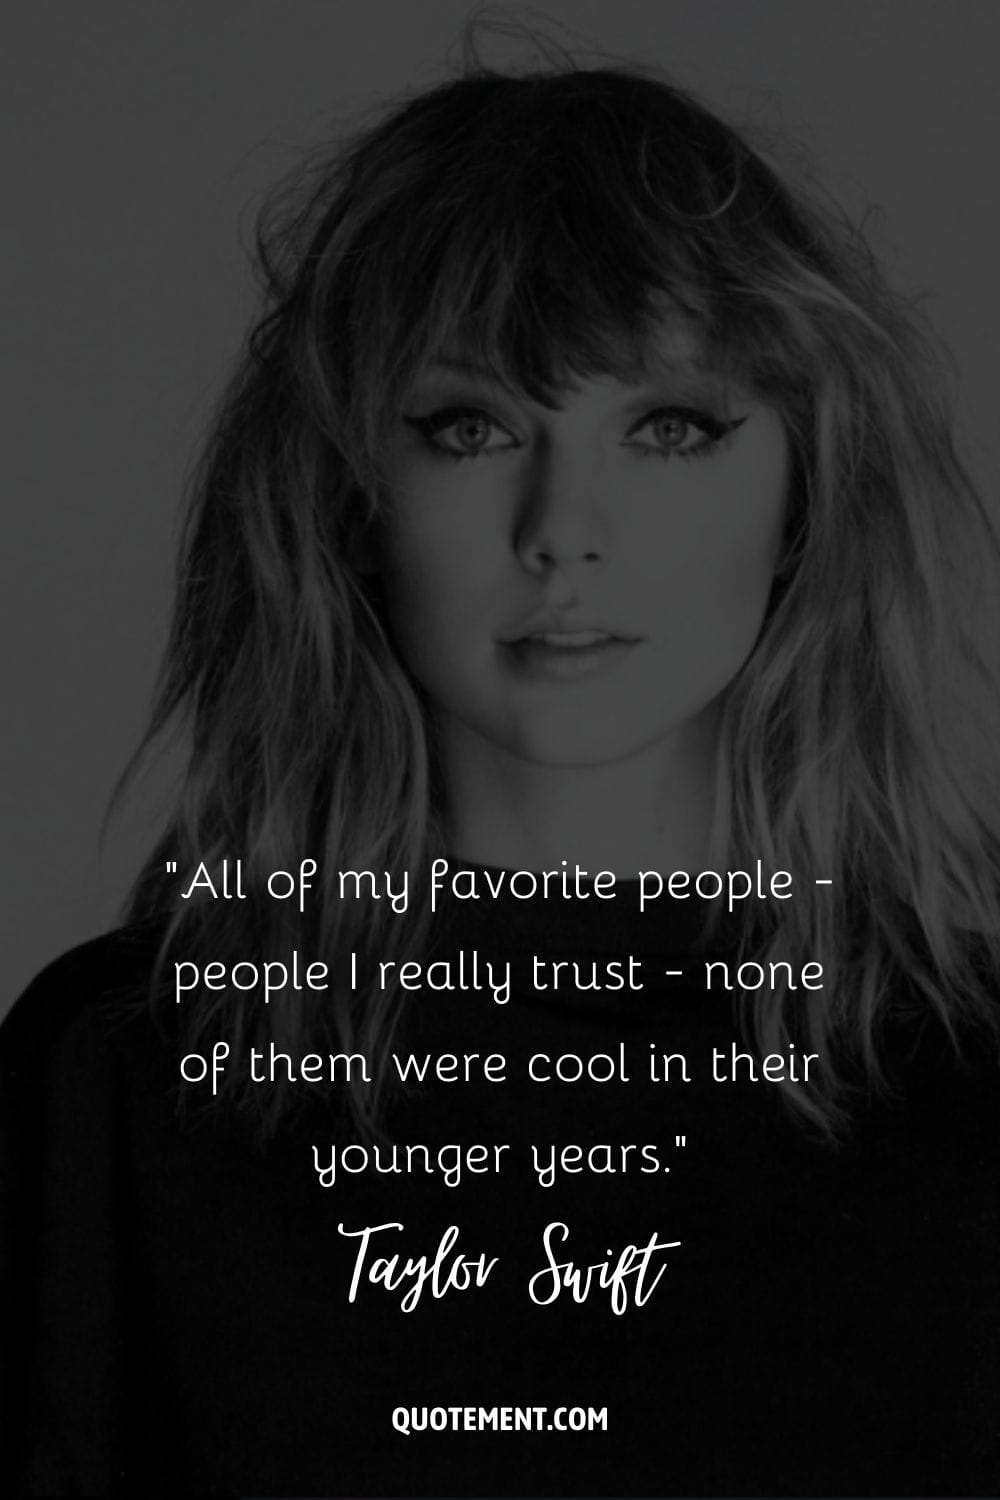 “All of my favorite people - people I really trust - none of them were cool in their younger years.” ― Taylor Swift